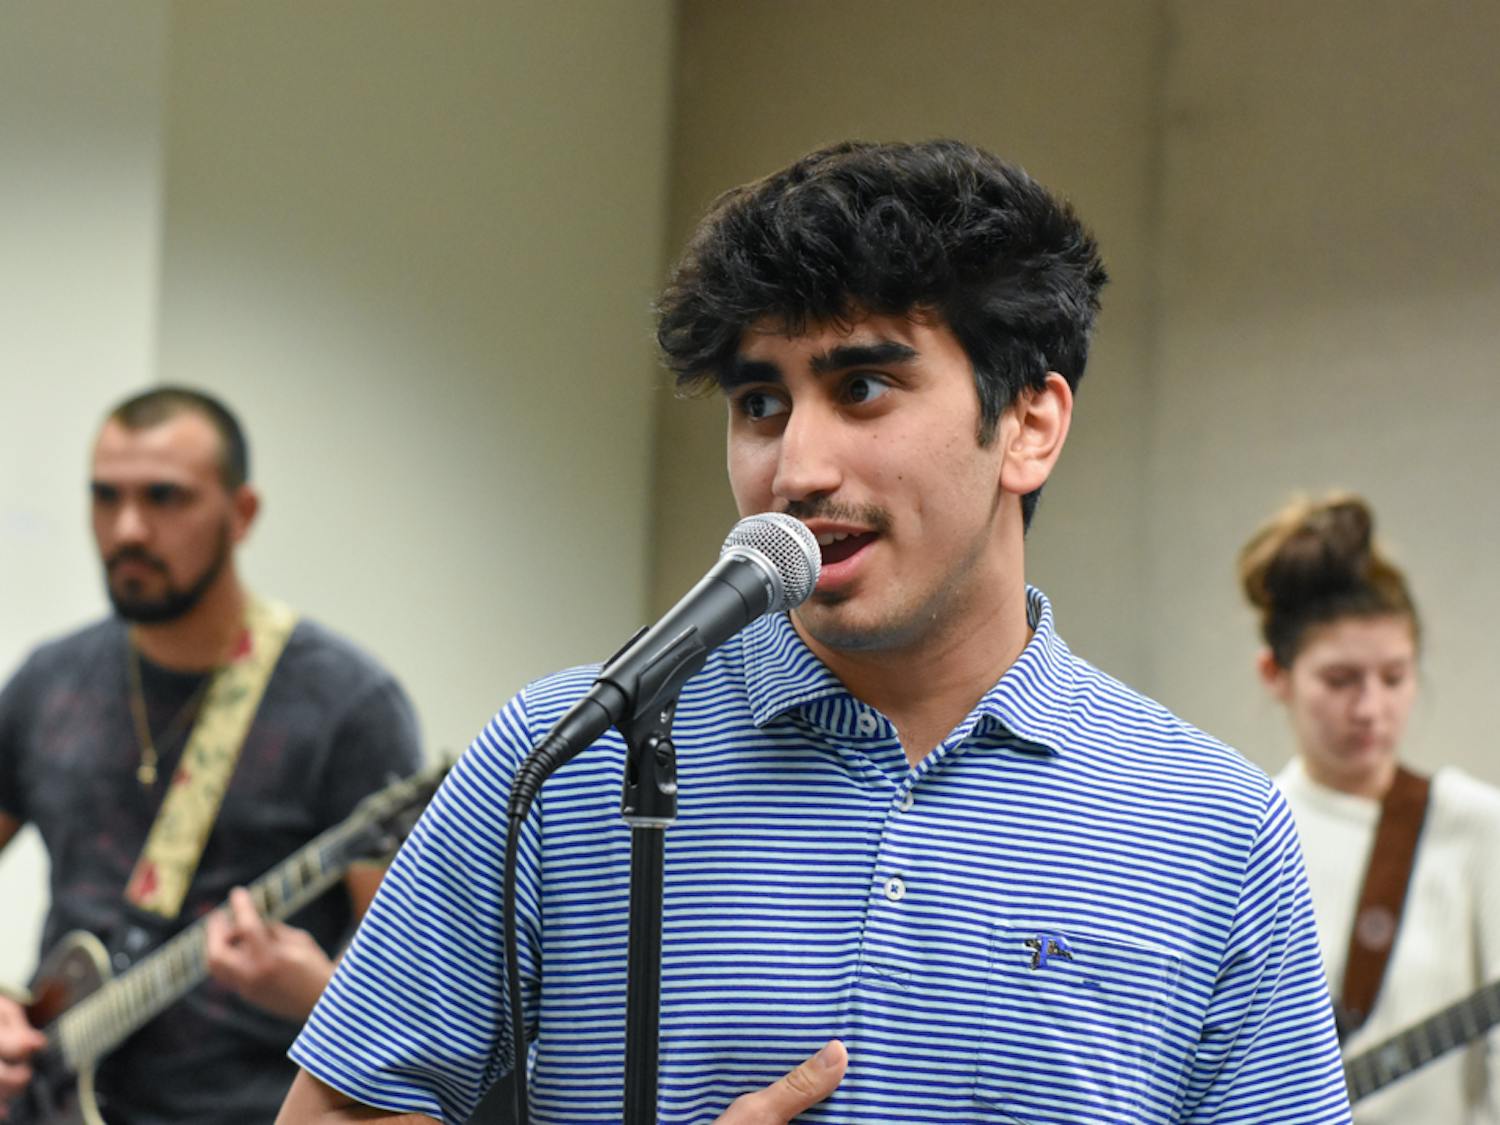 First-year music industry studies student Dan Porcelli sings “Wild Thing” by The Troggs as the ensemble practices for its performance on Feb. 13, 2023. The ensemble performed at the Koger Center for students and community members.